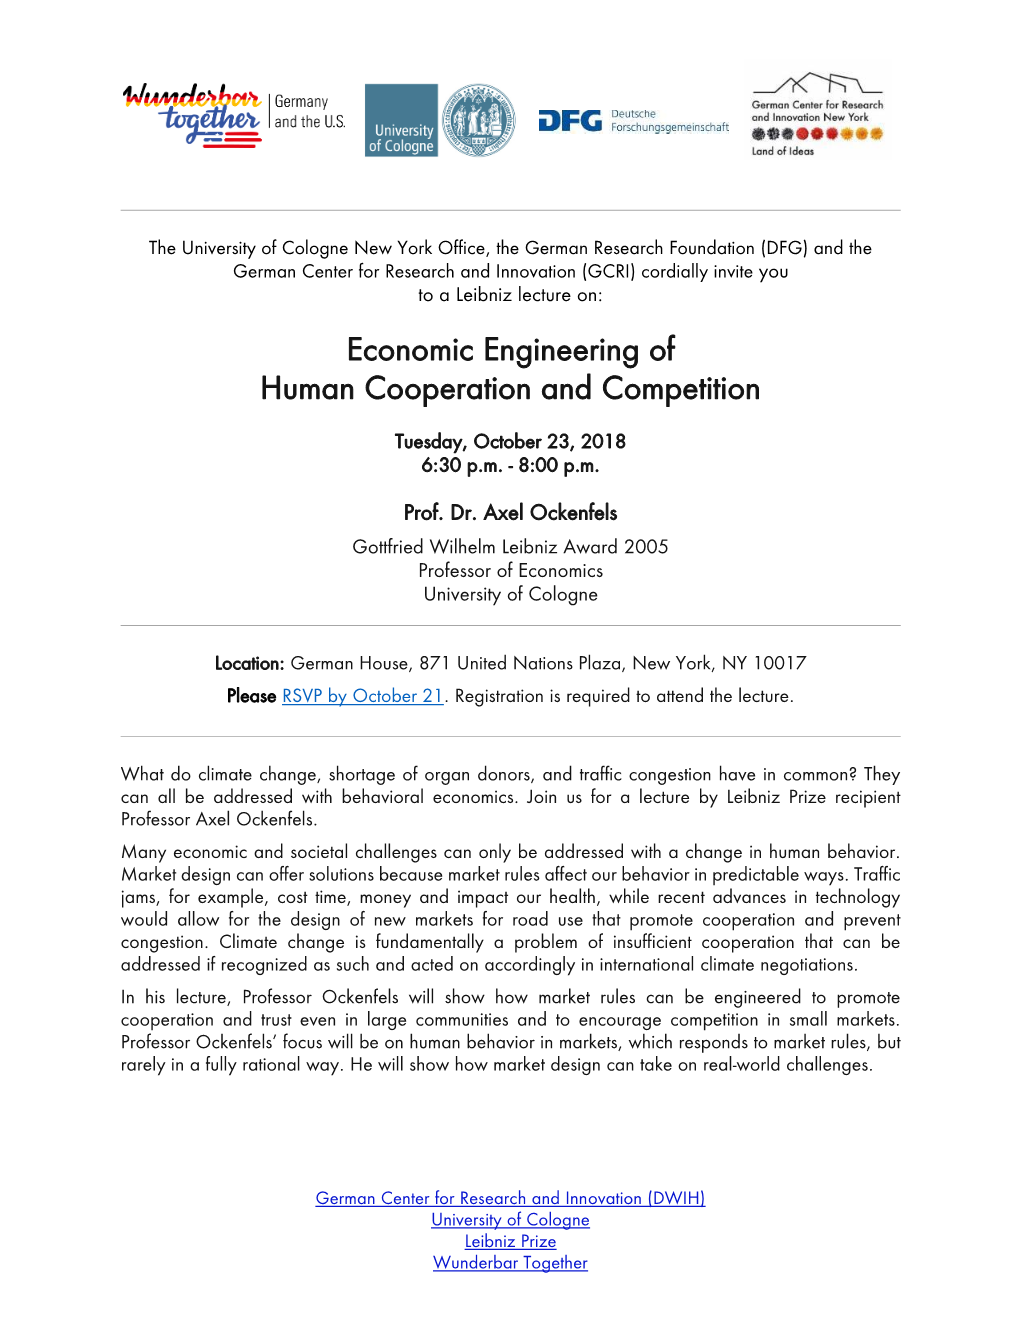 Economic Engineering of Human Cooperation and Competition